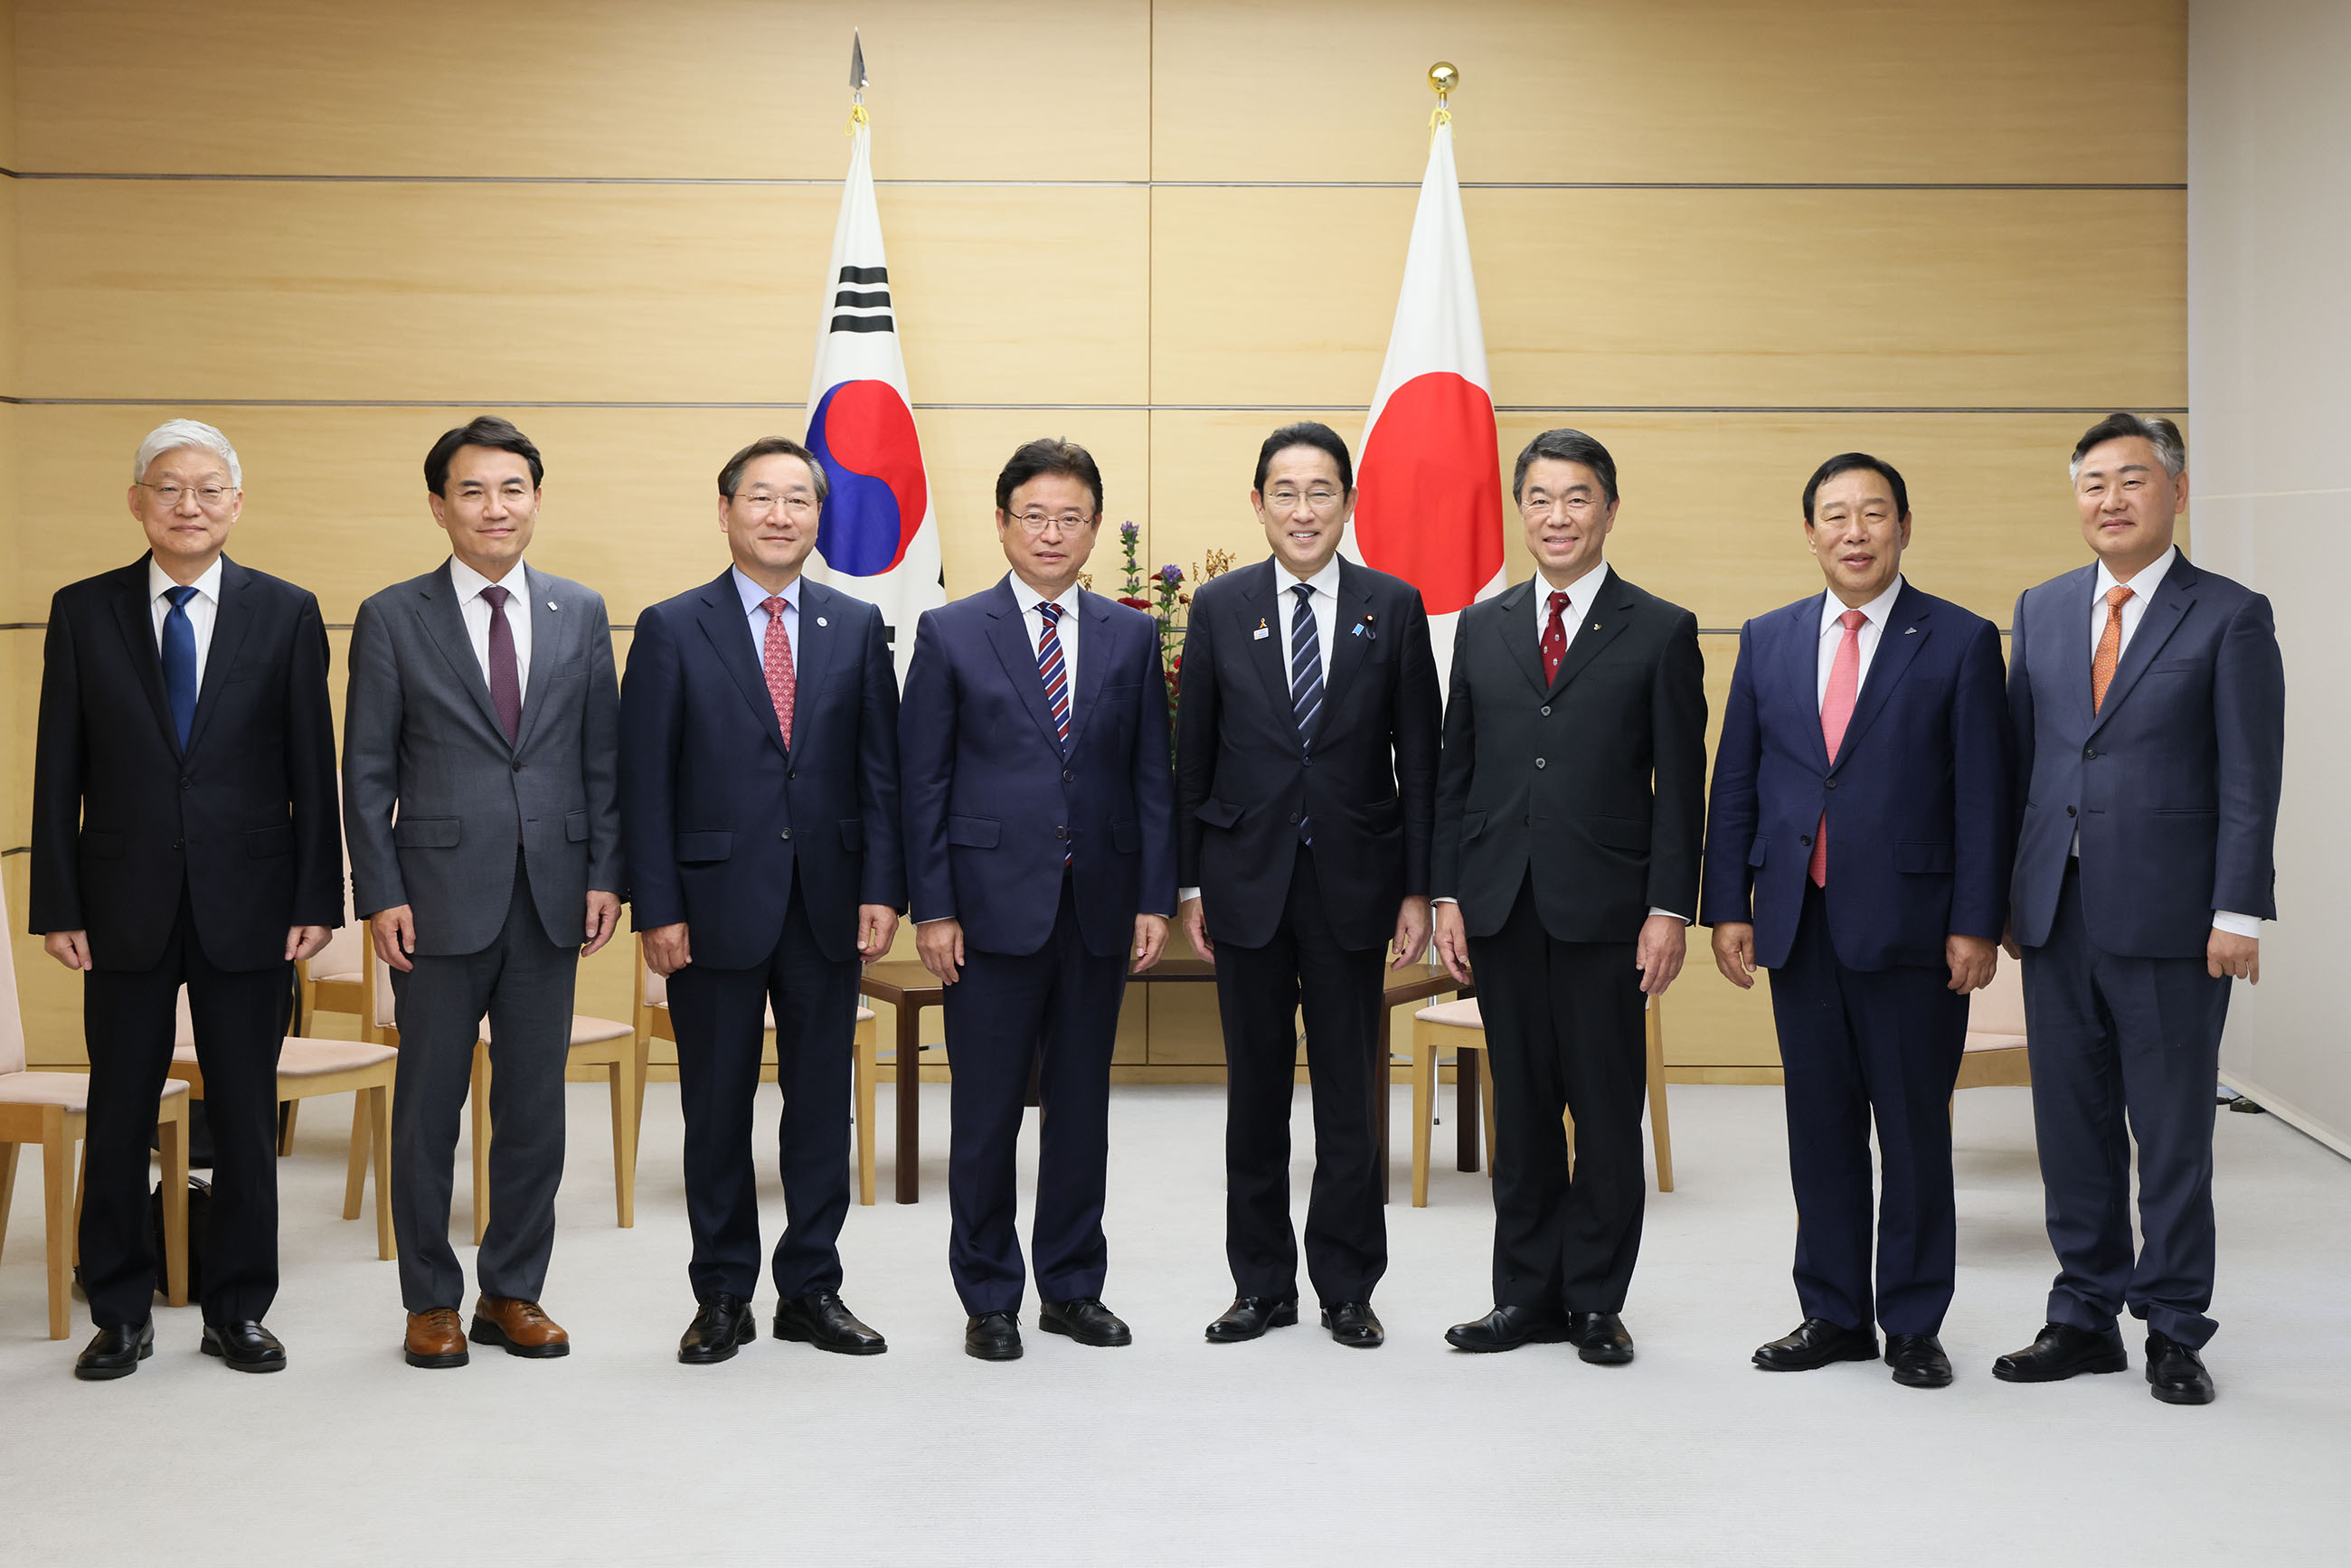 Japan-Korea Governors’ Meeting: Courtesy Call from the Participating Korean Governors and Mayors